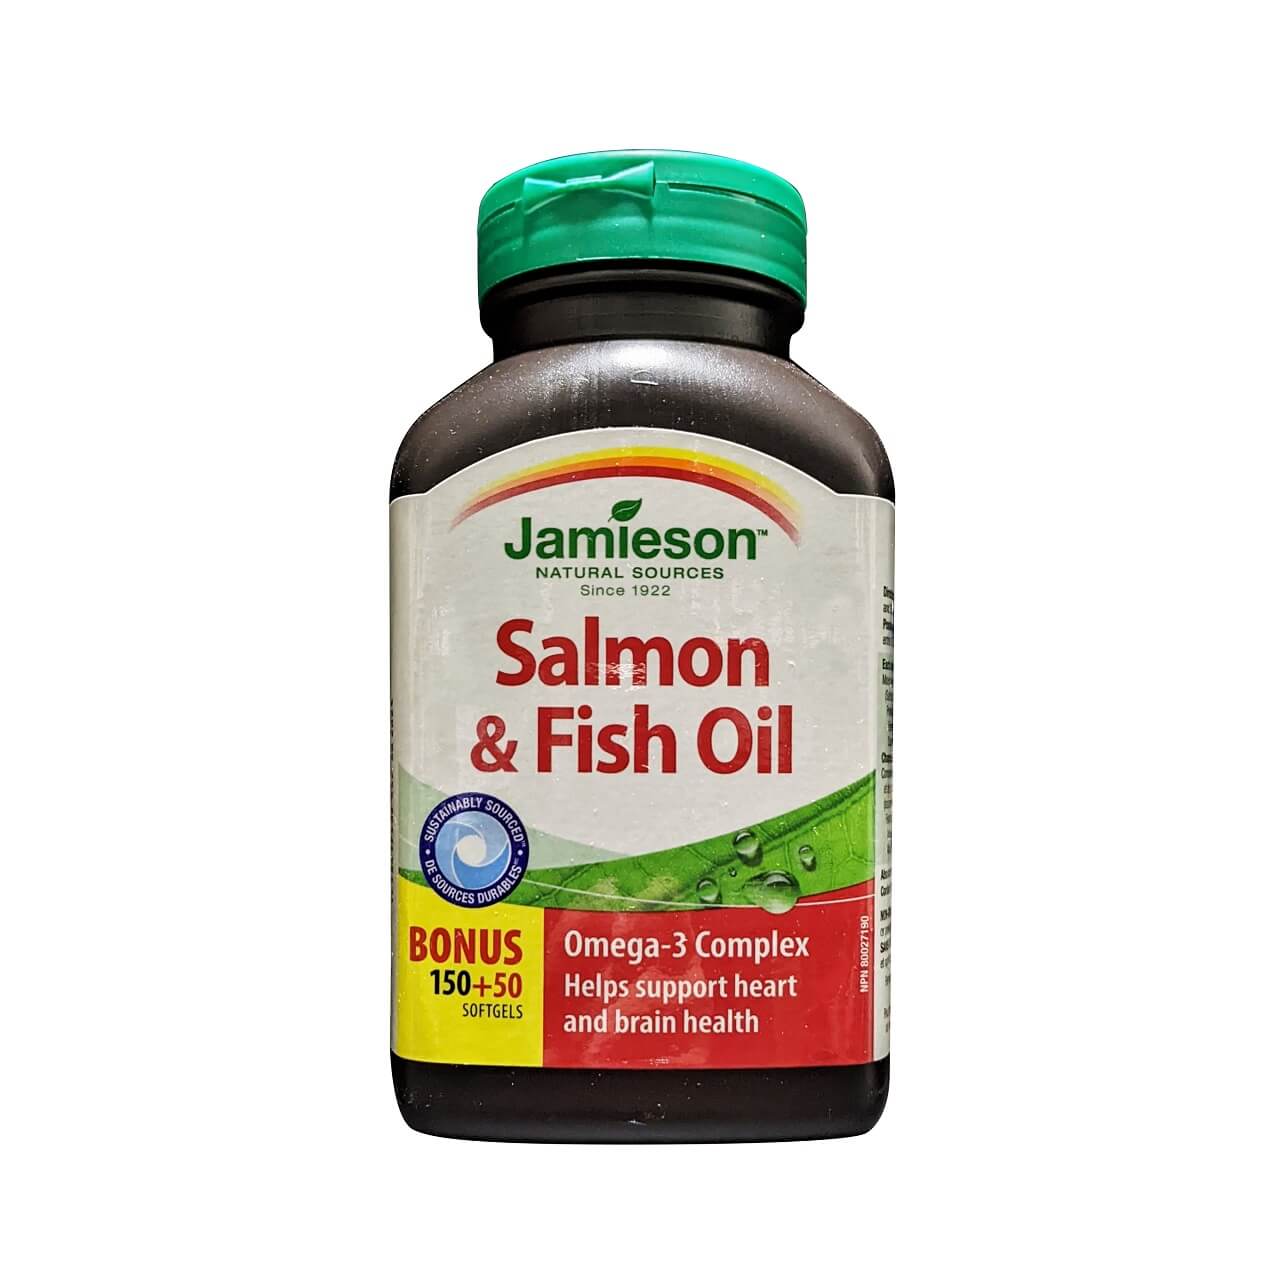 Product label for Jamieson Salmon and Fish Oil Omega-3 Complex (50 softgel bonus) (200 softgels) in English